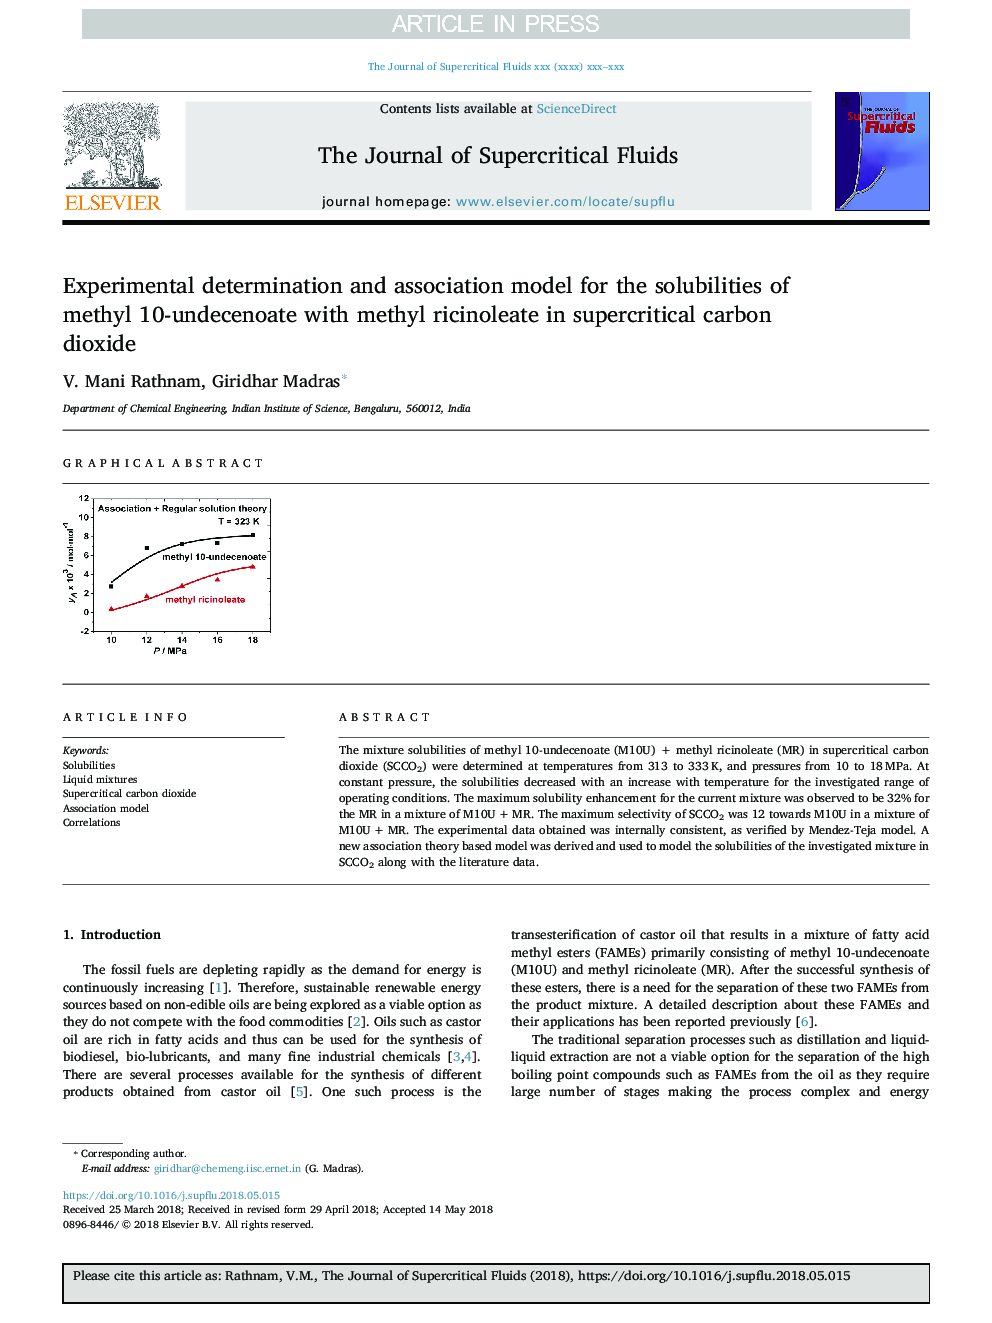 Experimental determination and association model for the solubilities of methyl 10-undecenoate with methyl ricinoleate in supercritical carbon dioxide